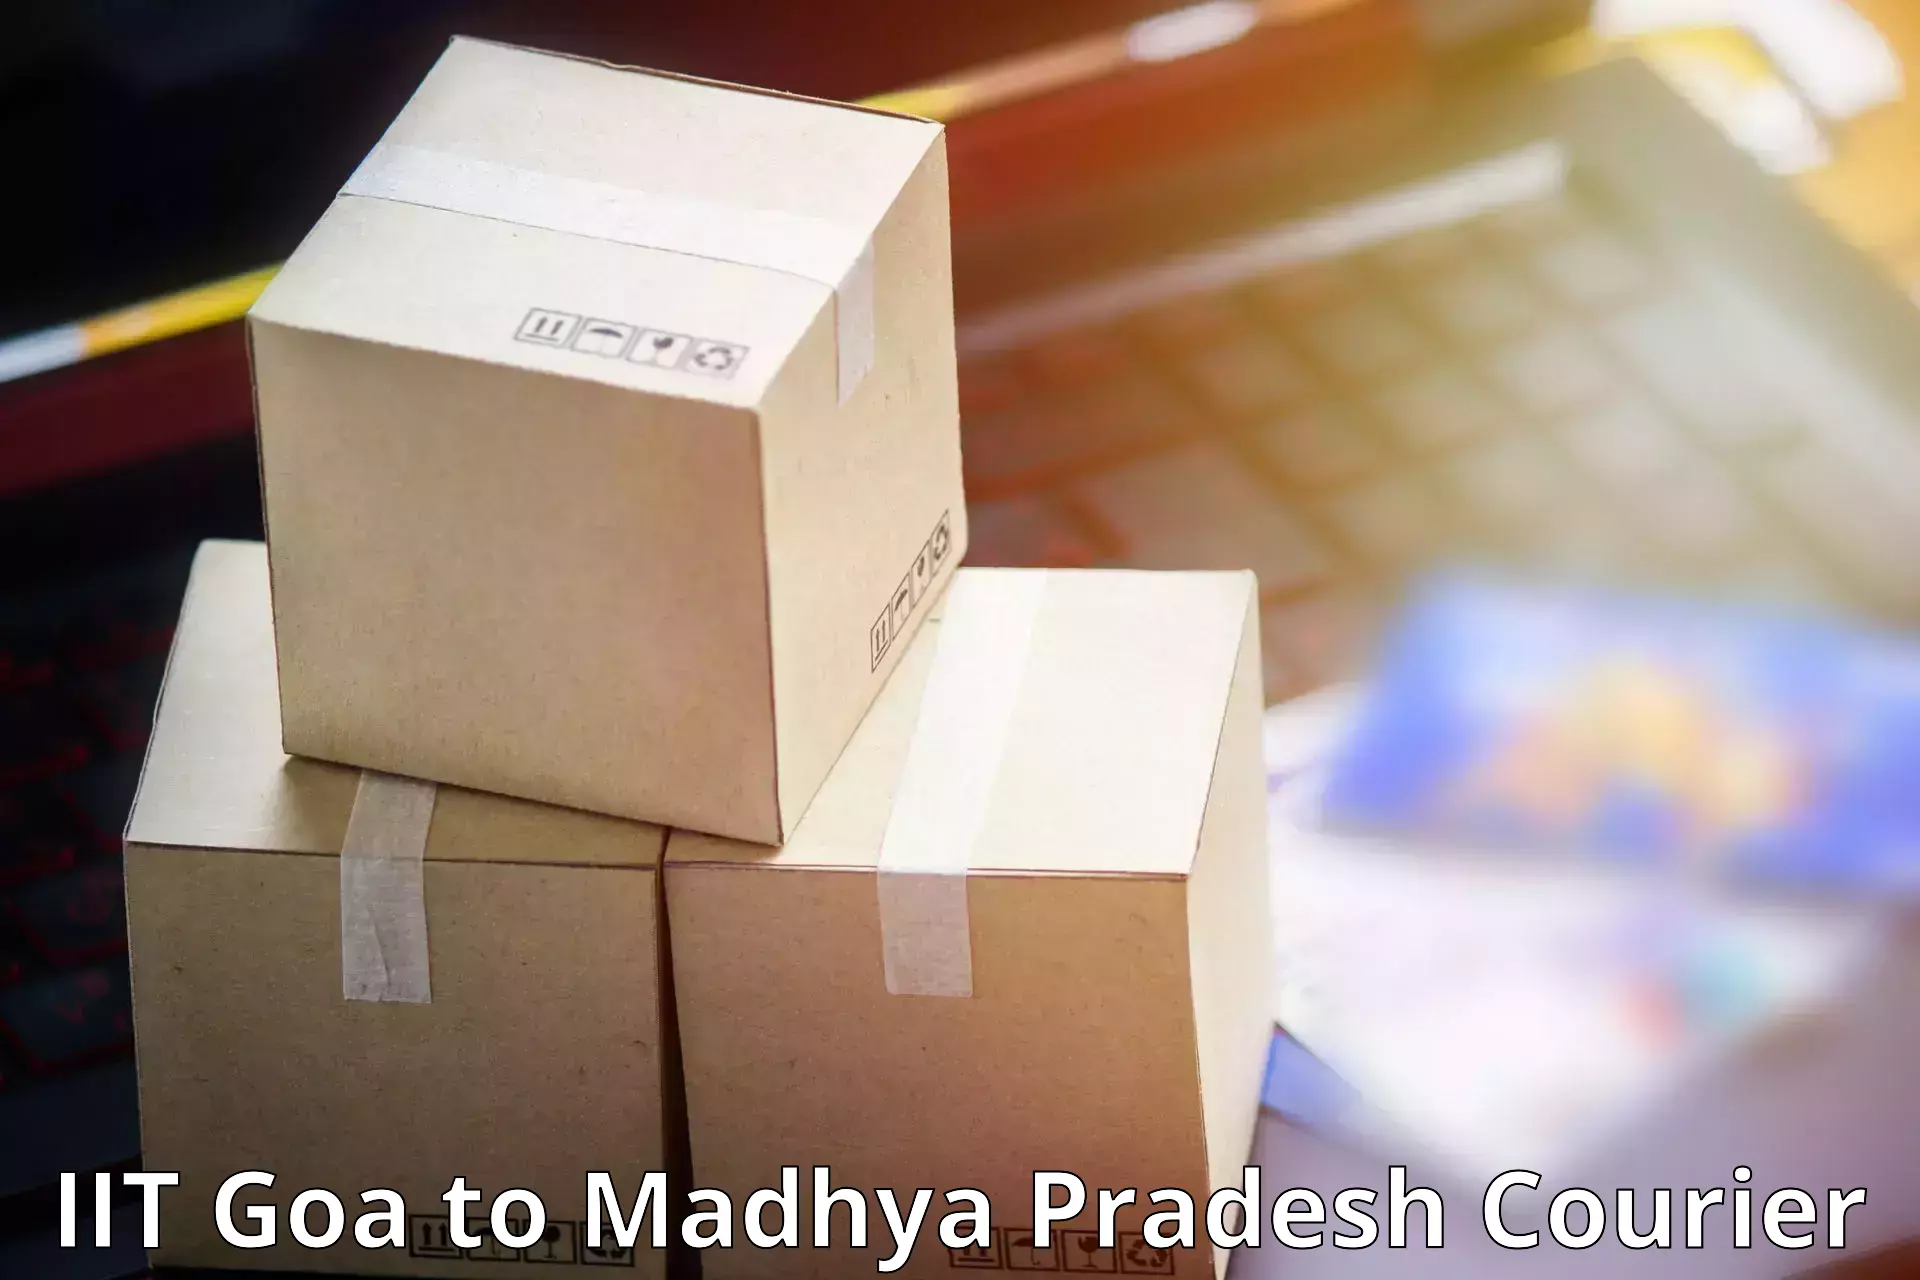 Express package handling IIT Goa to Madwas